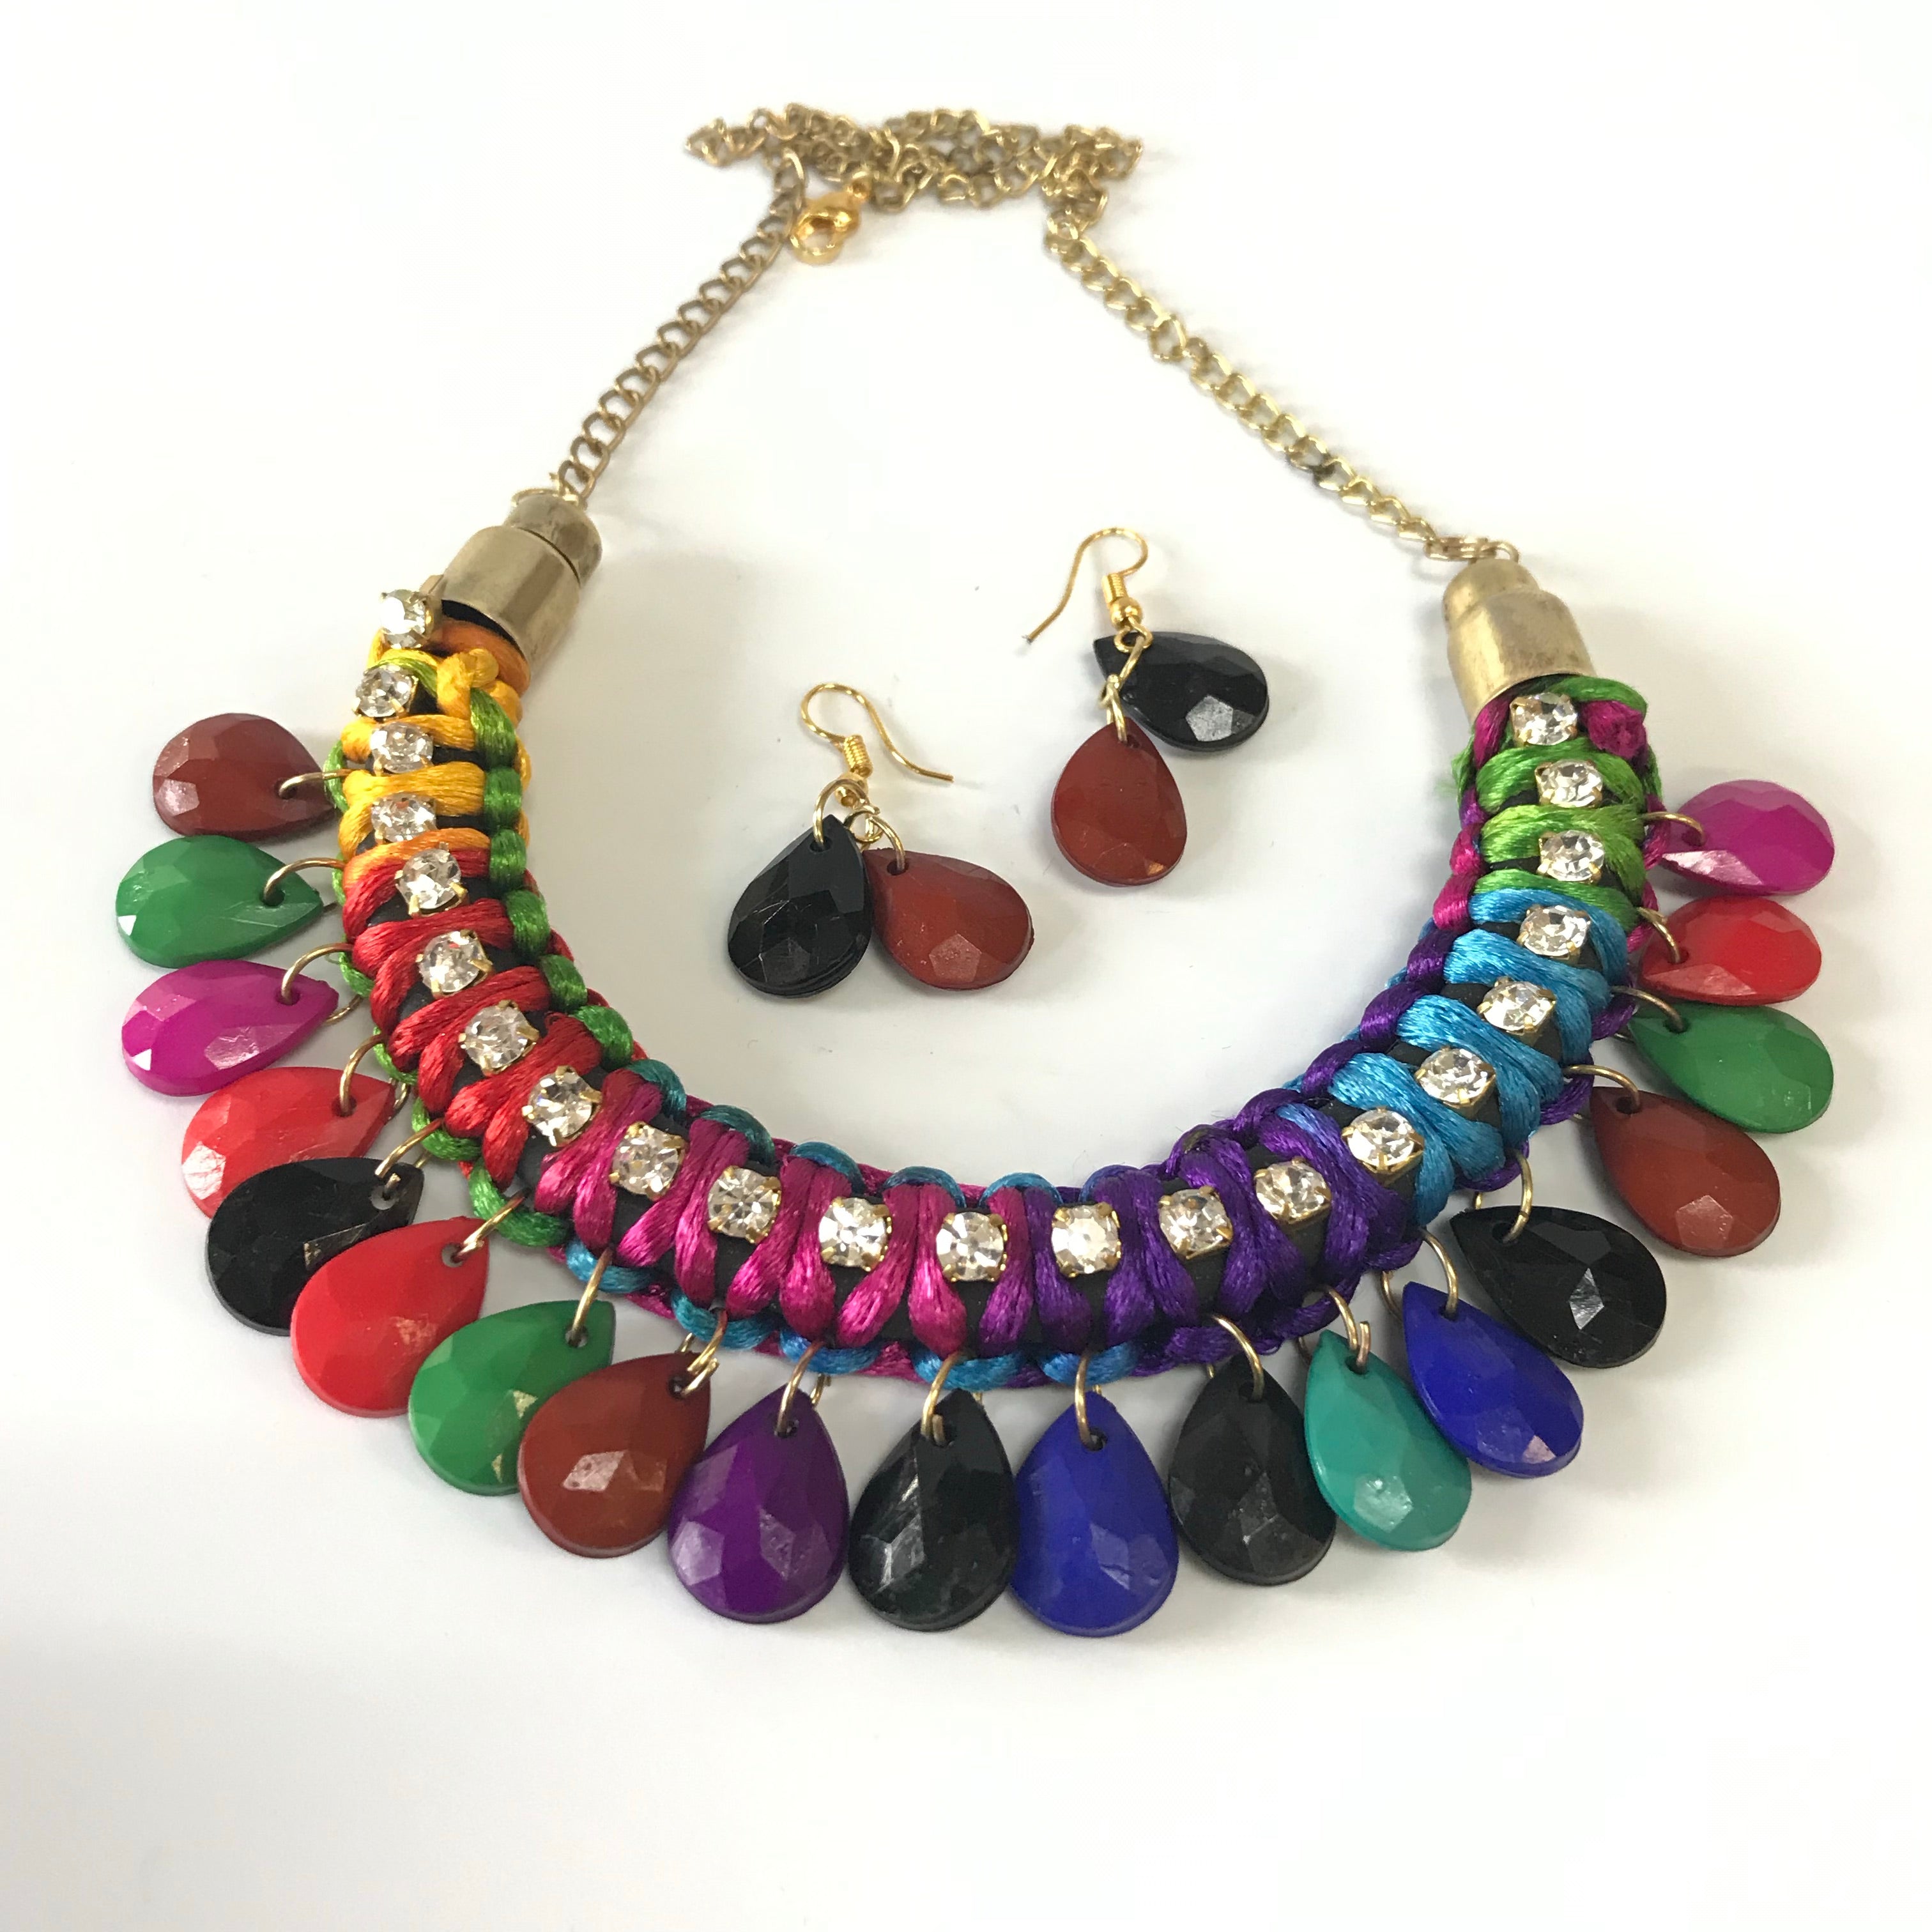 Silk thread and Bead Necklace